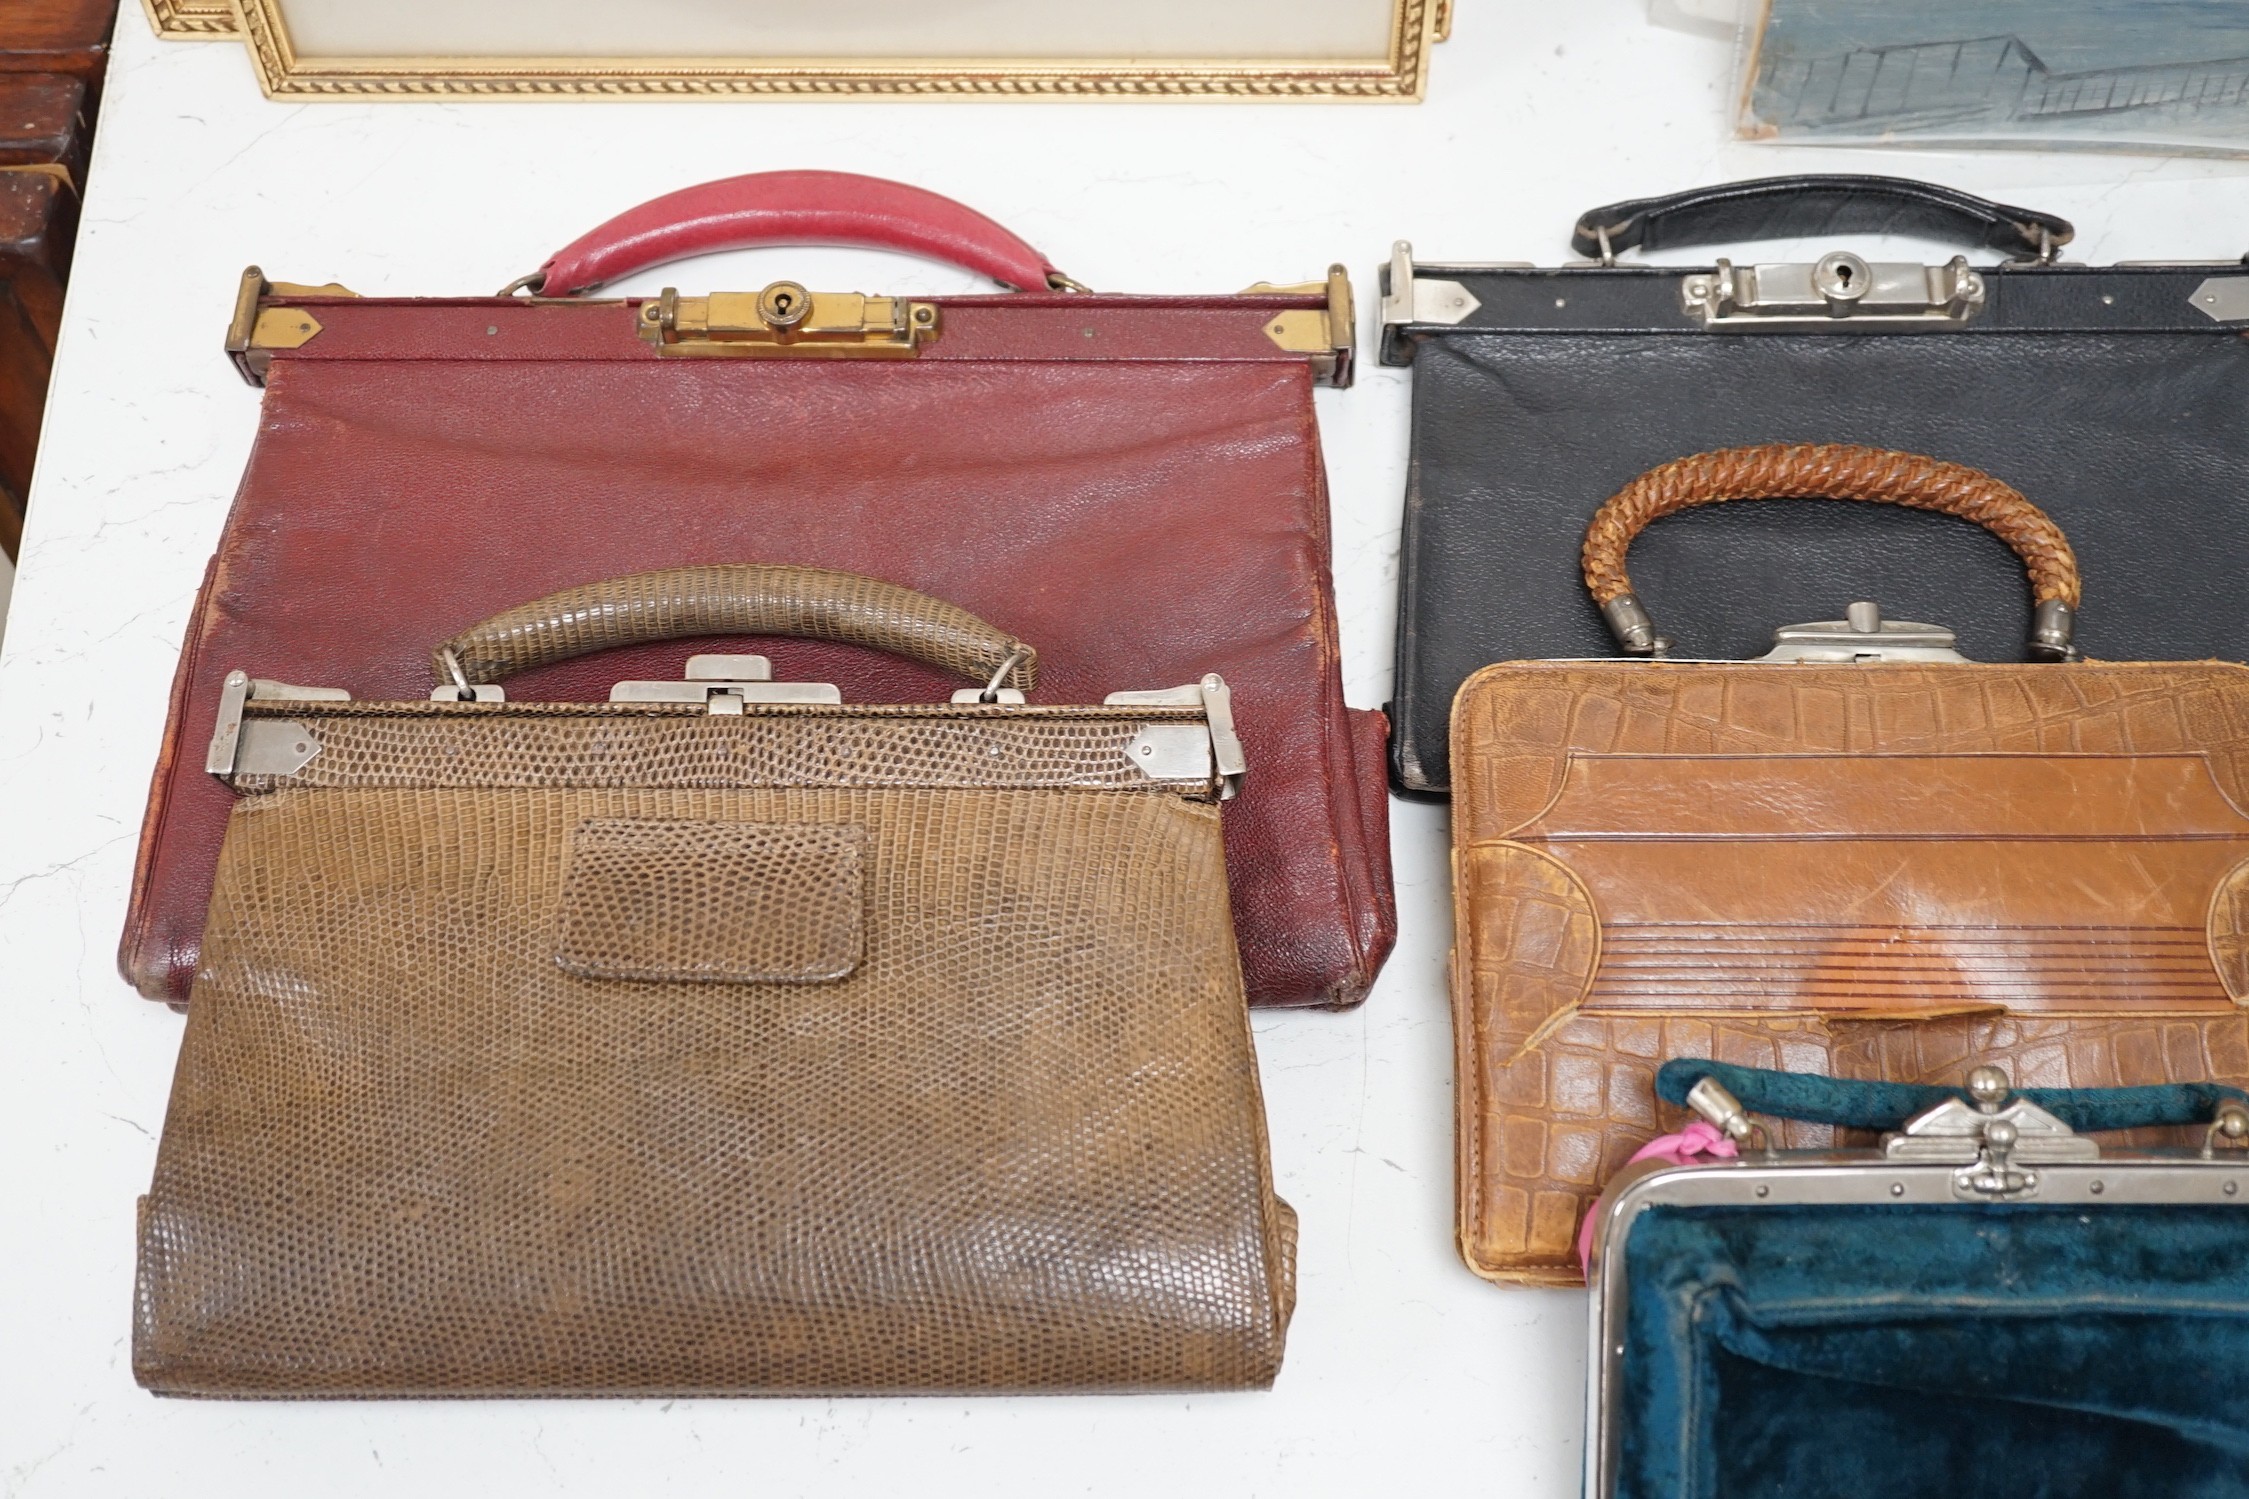 A collection of nine late 19th century to 1940’s mixed leather ladies handbags with ‘Doctors bag’ style metal clasps